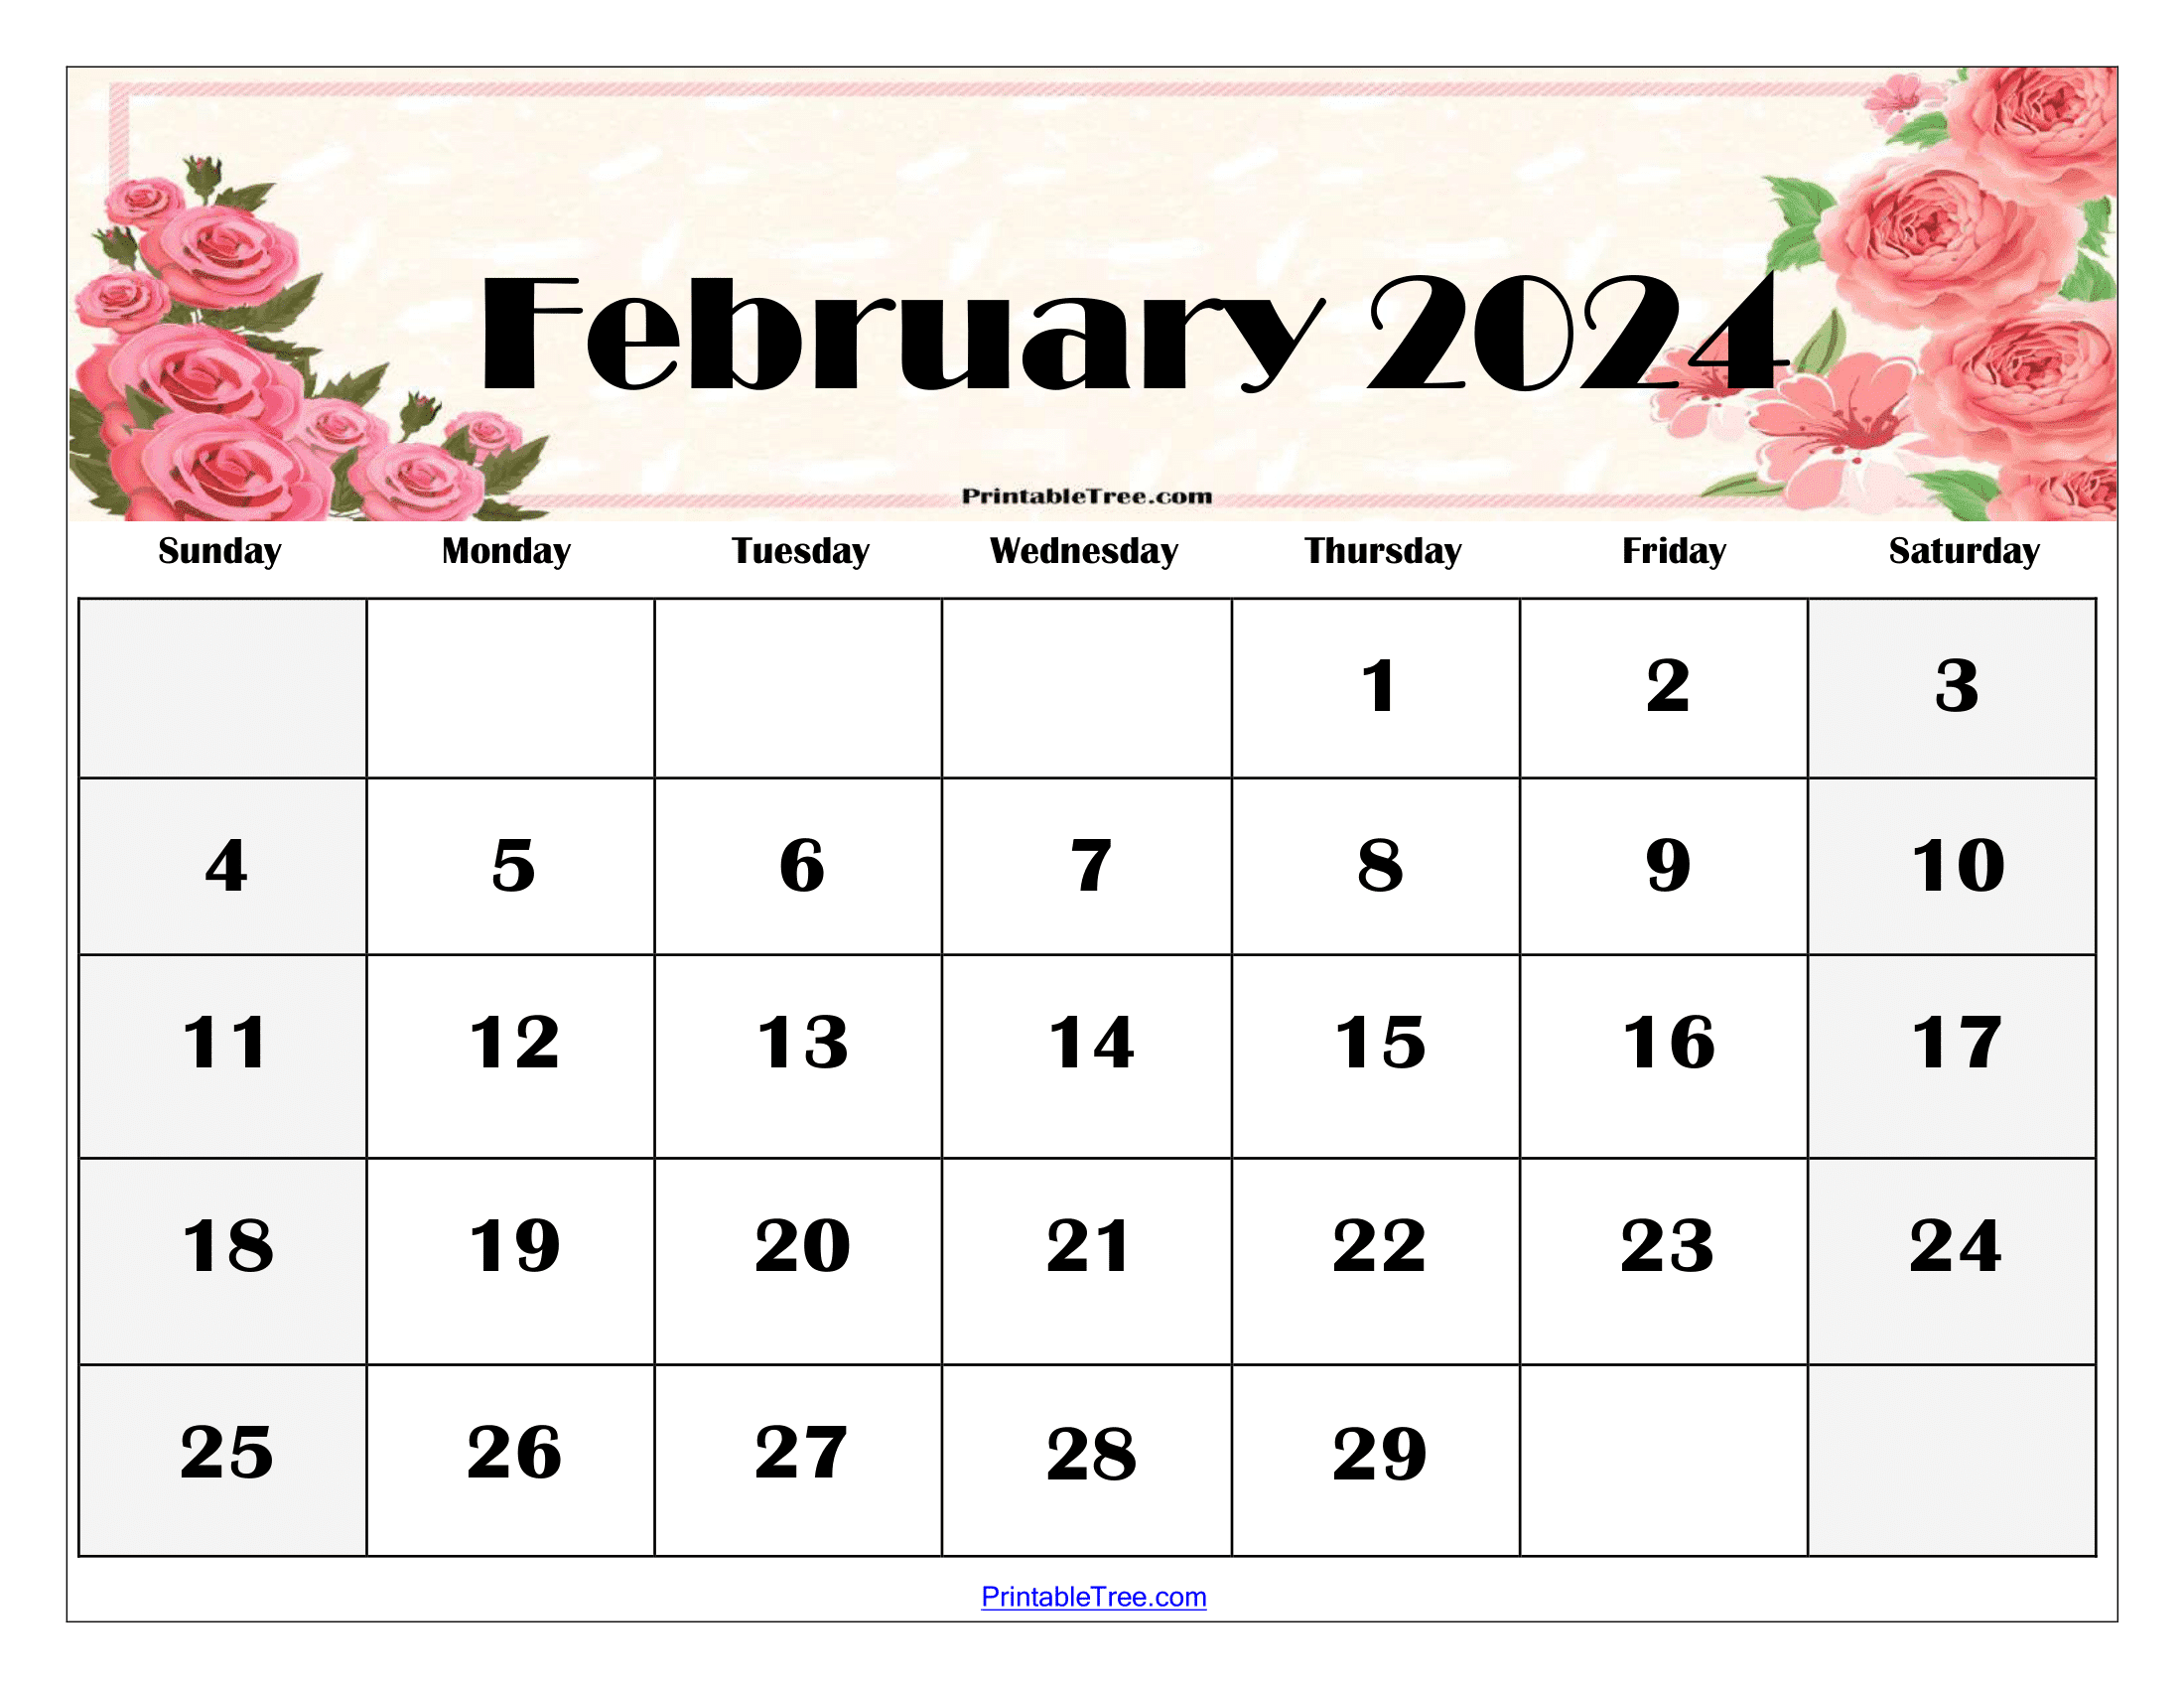 February 2024 Calendar Printable PDF Template With Holidays - Free Printable 2024 Floral Full Page Calender